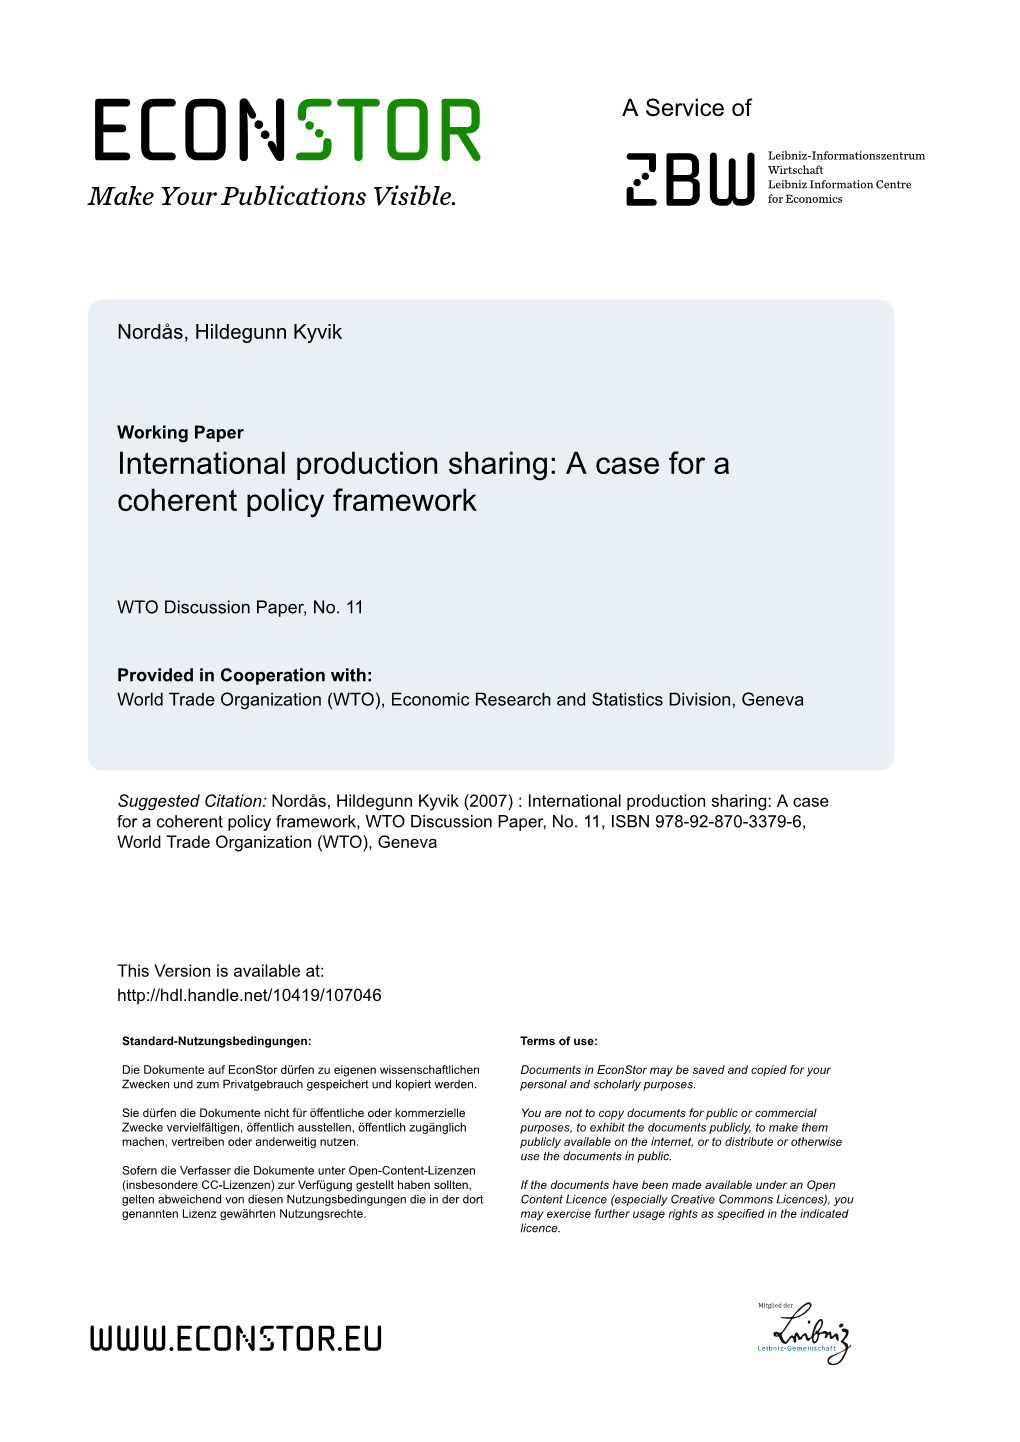 International Production Sharing: a Case for a Coherent Policy Framework